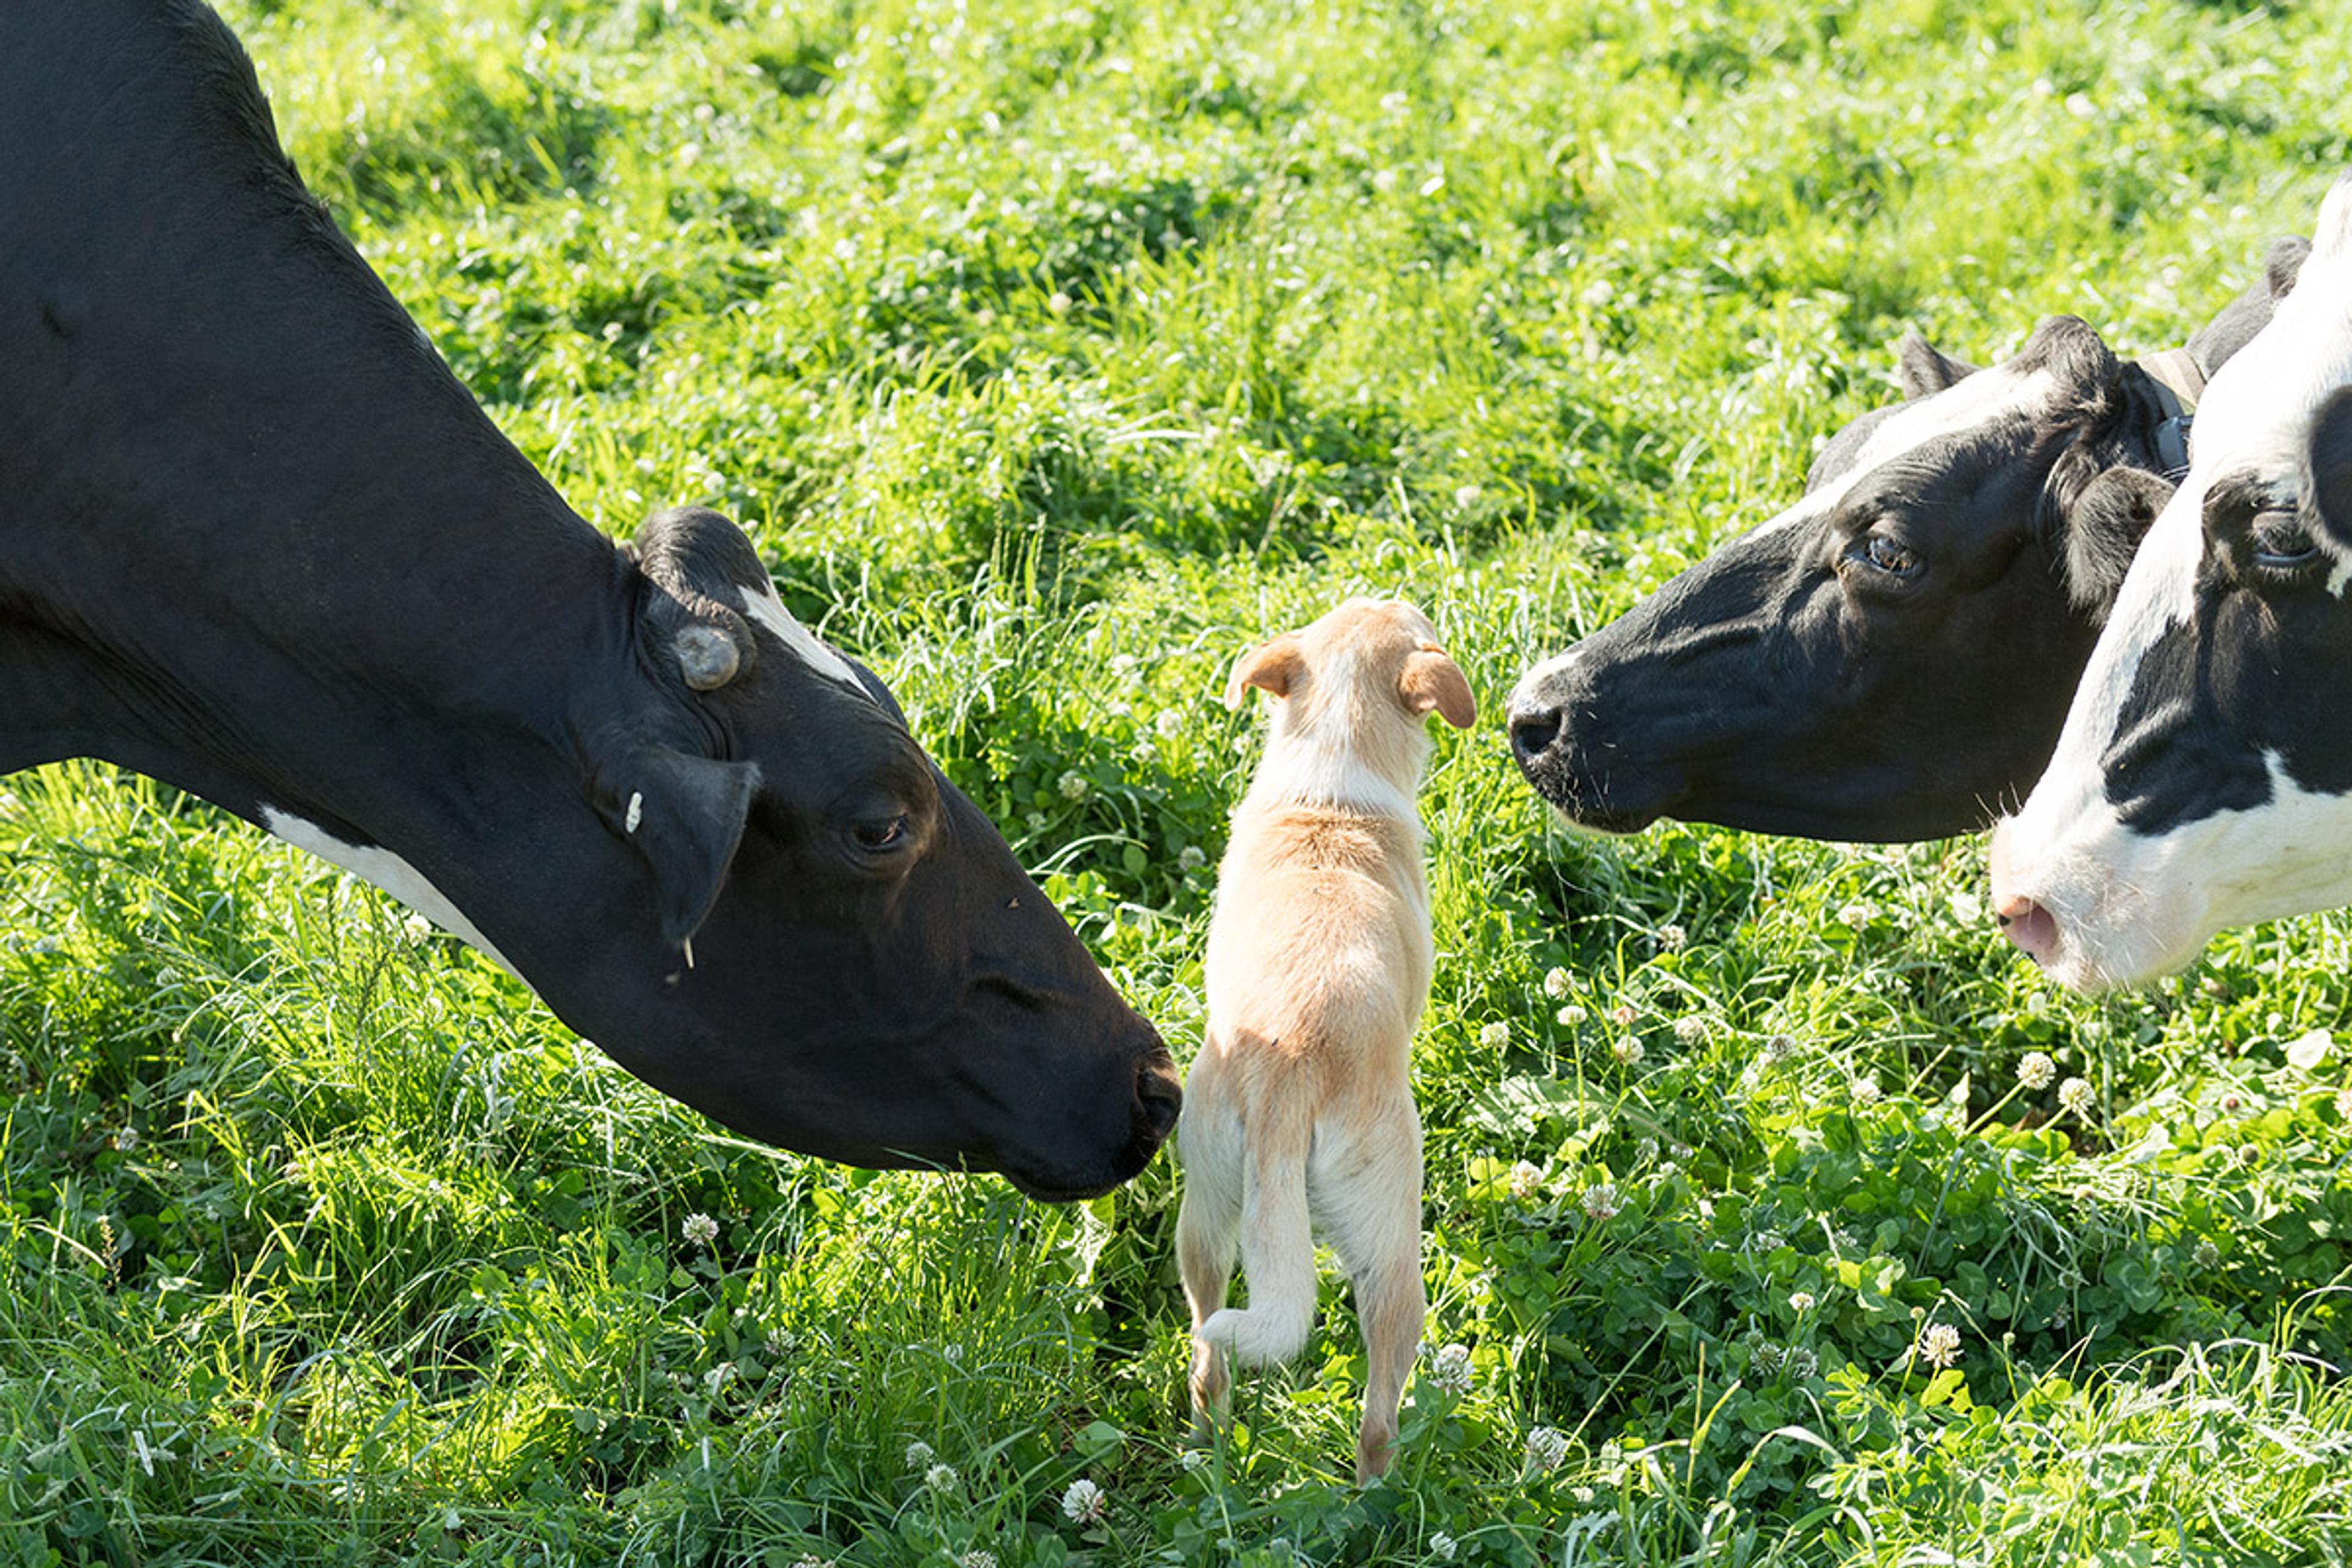 Three Holstein cows sniff a yellow dog standing in a green pasture.